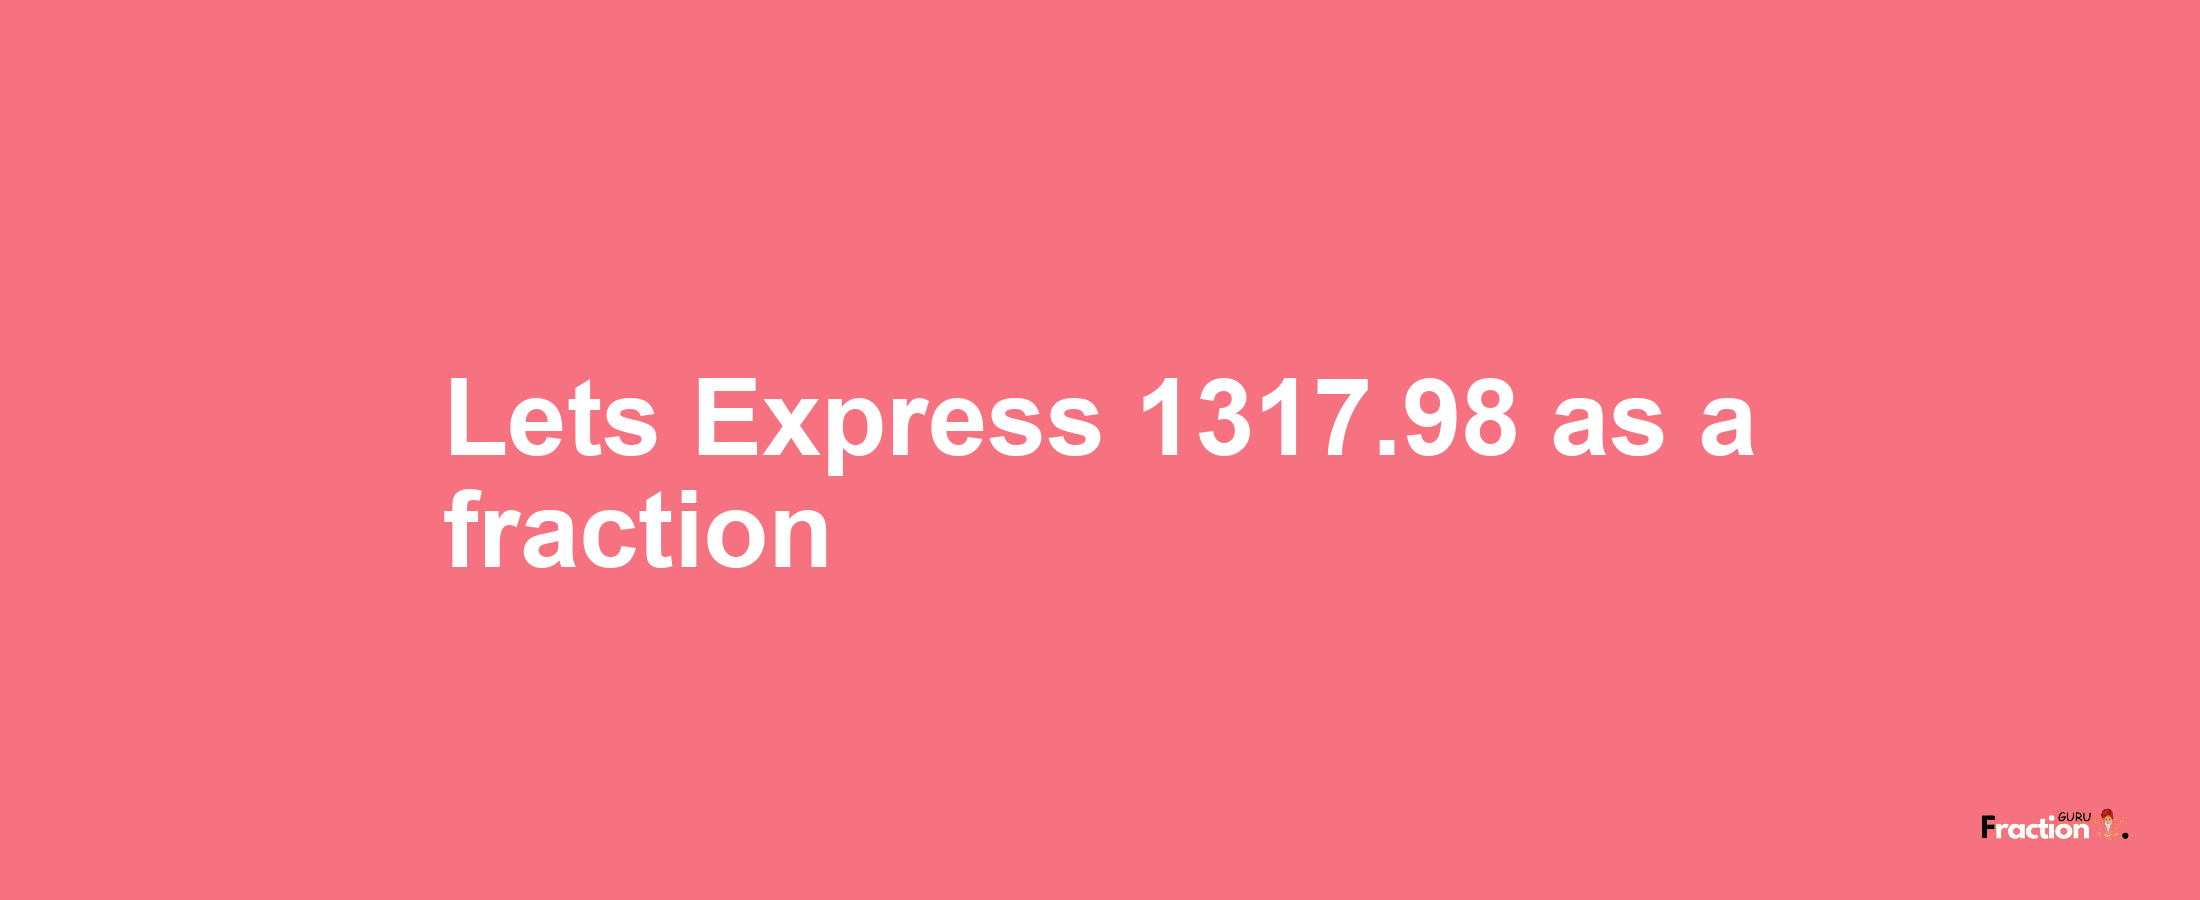 Lets Express 1317.98 as afraction